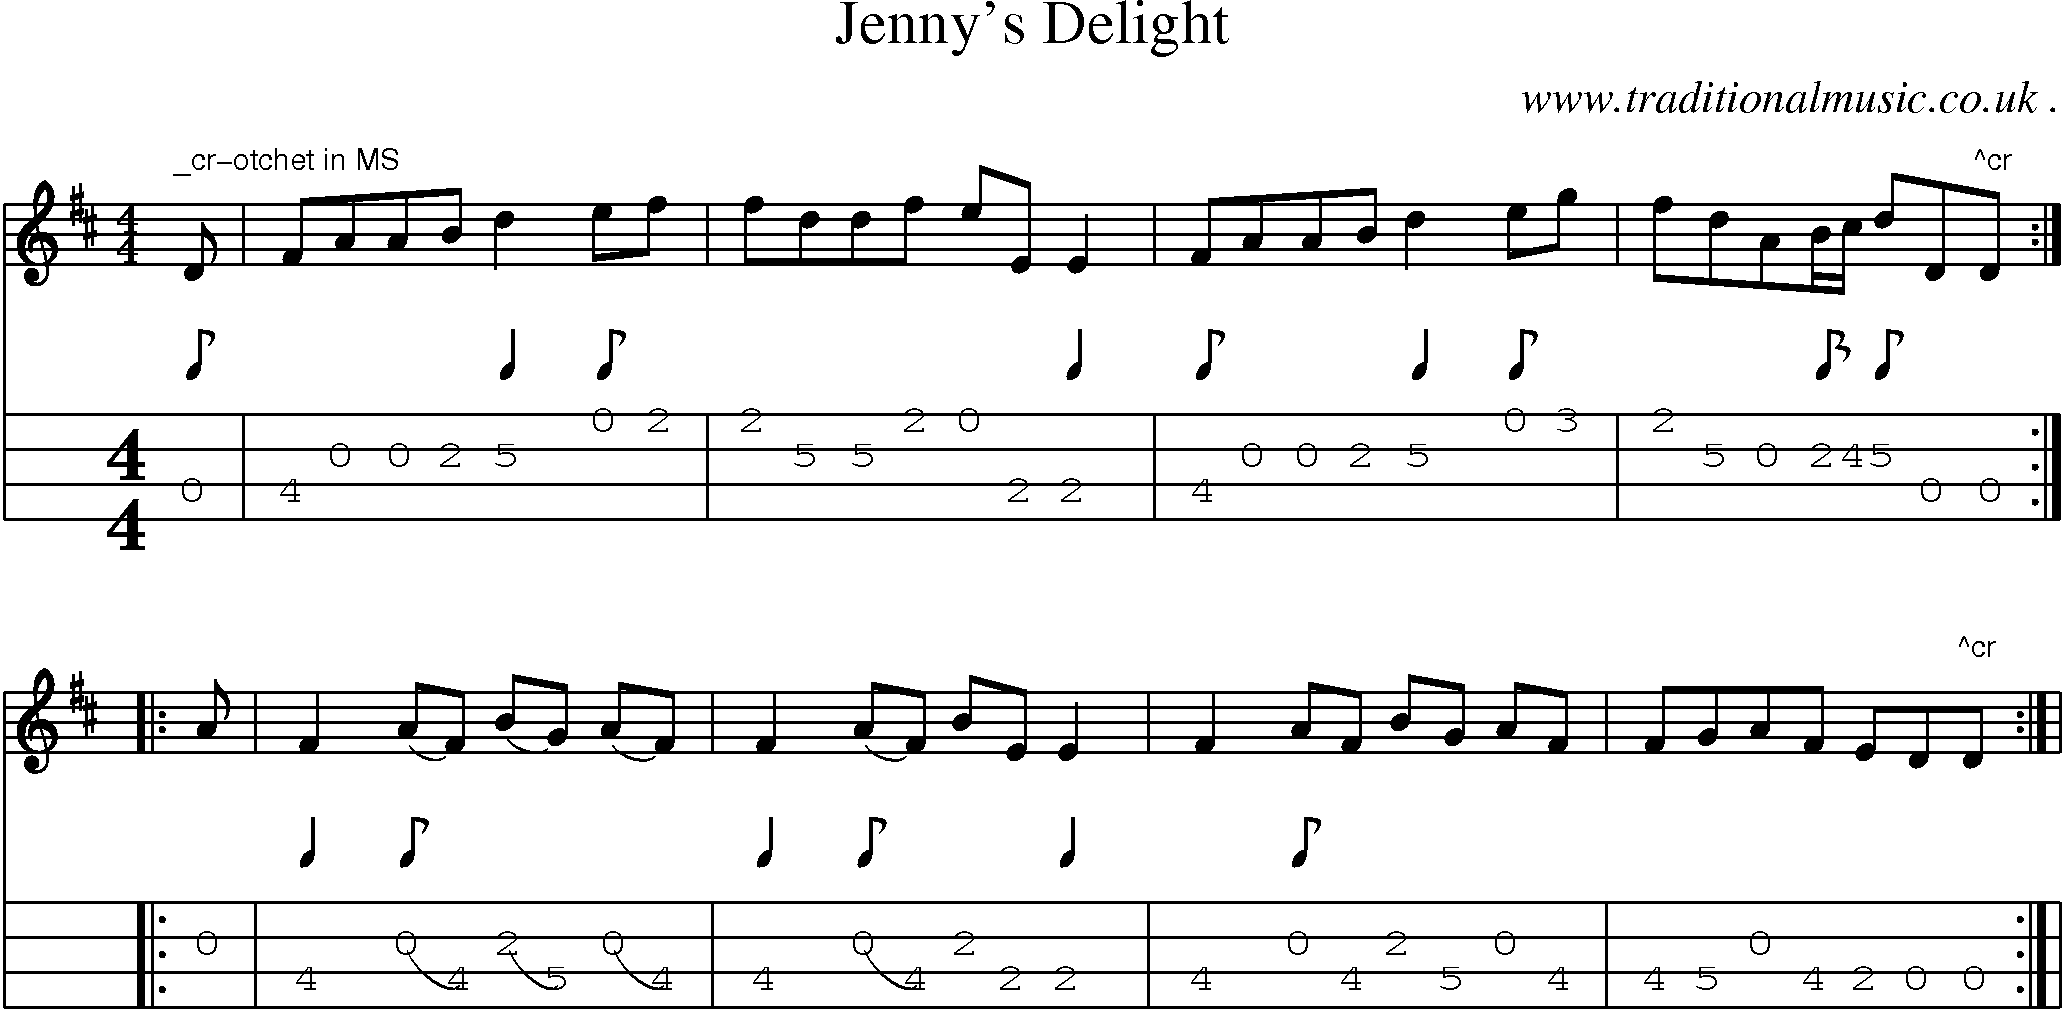 Sheet-Music and Mandolin Tabs for Jennys Delight